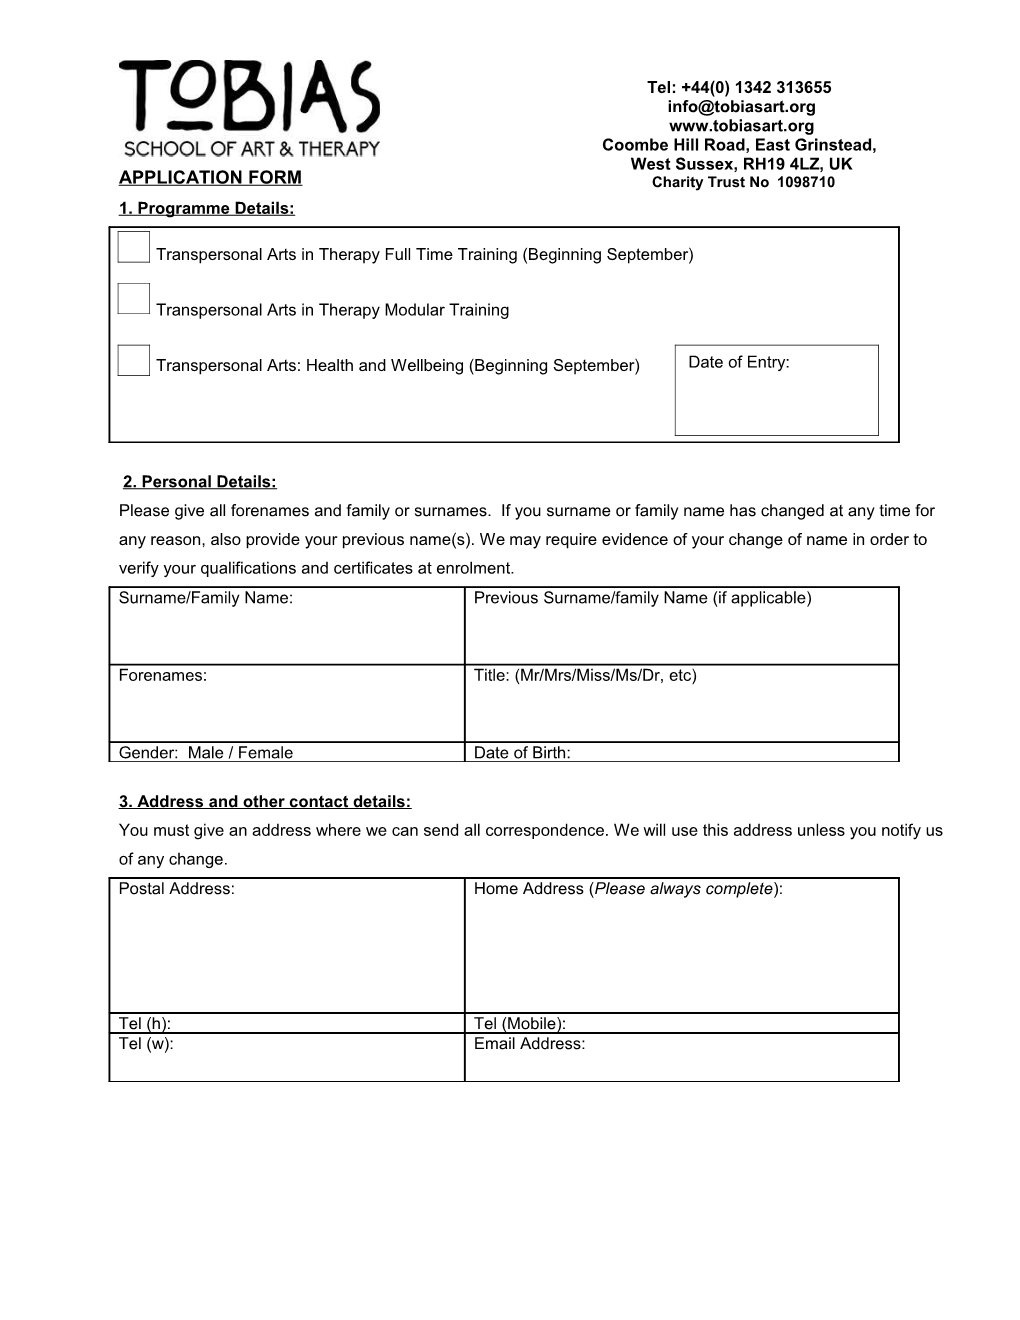 Application Form s10